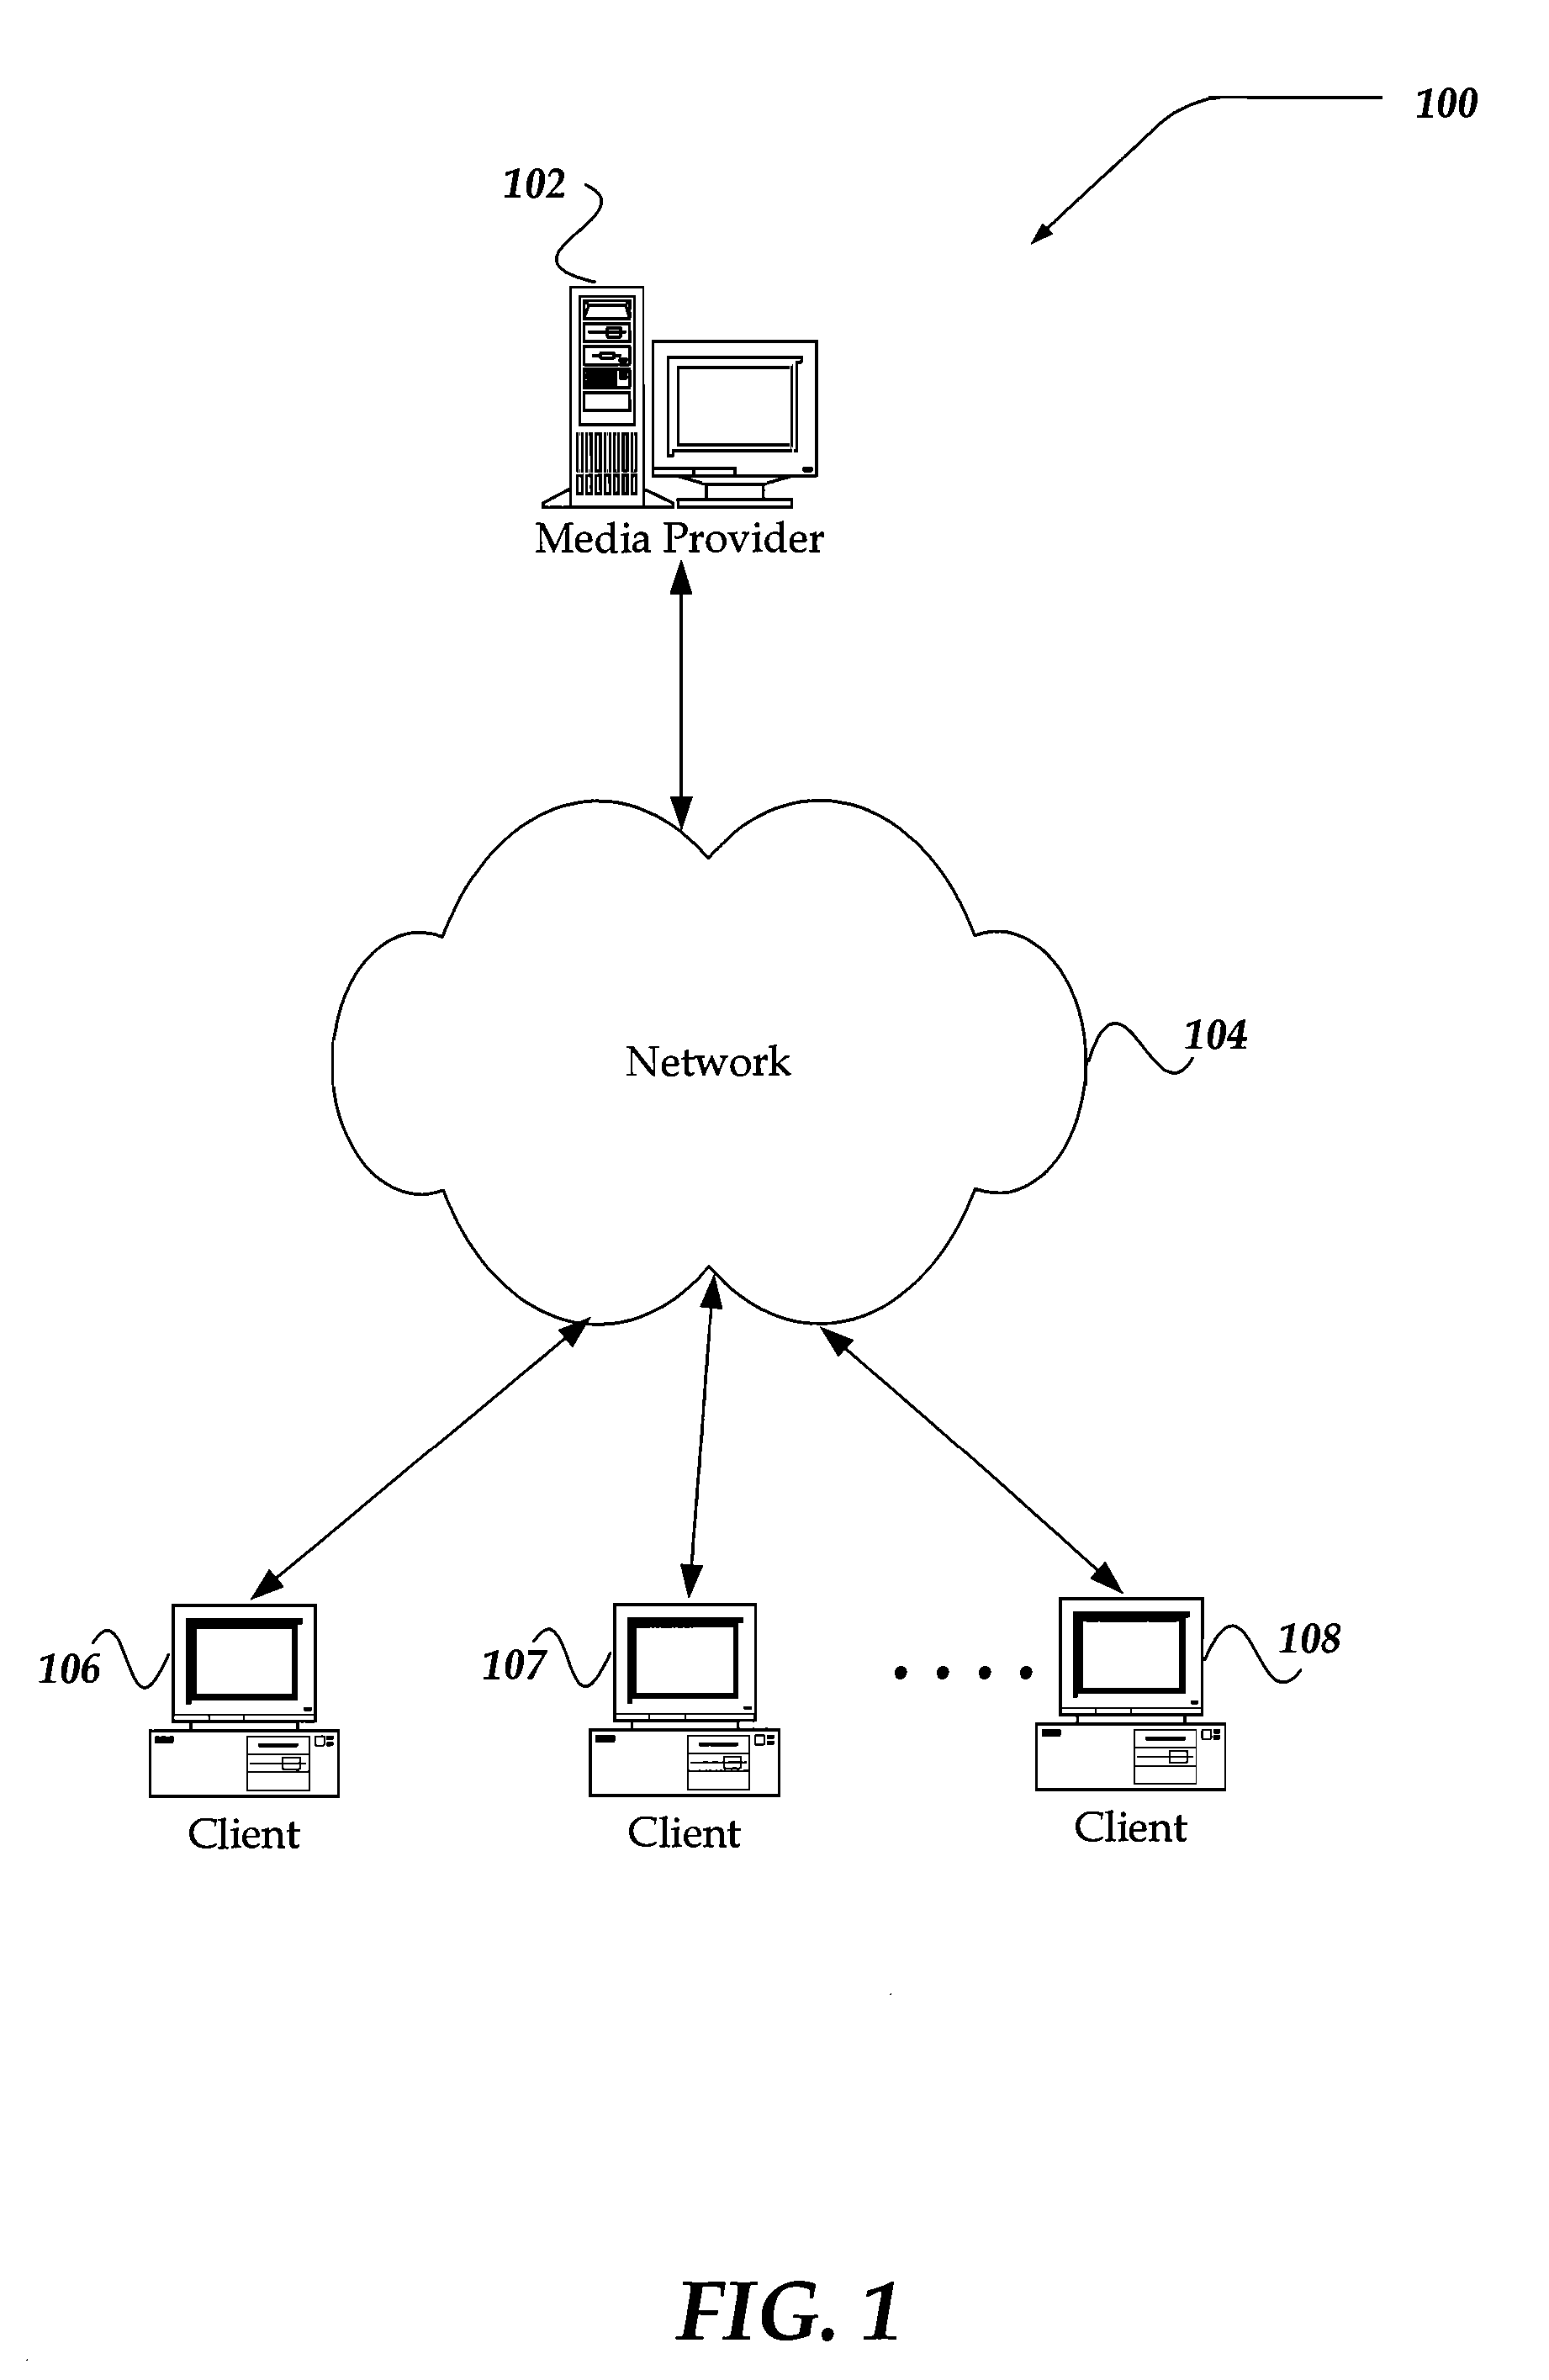 Tamper prevention and detection for video provided over a network to a client